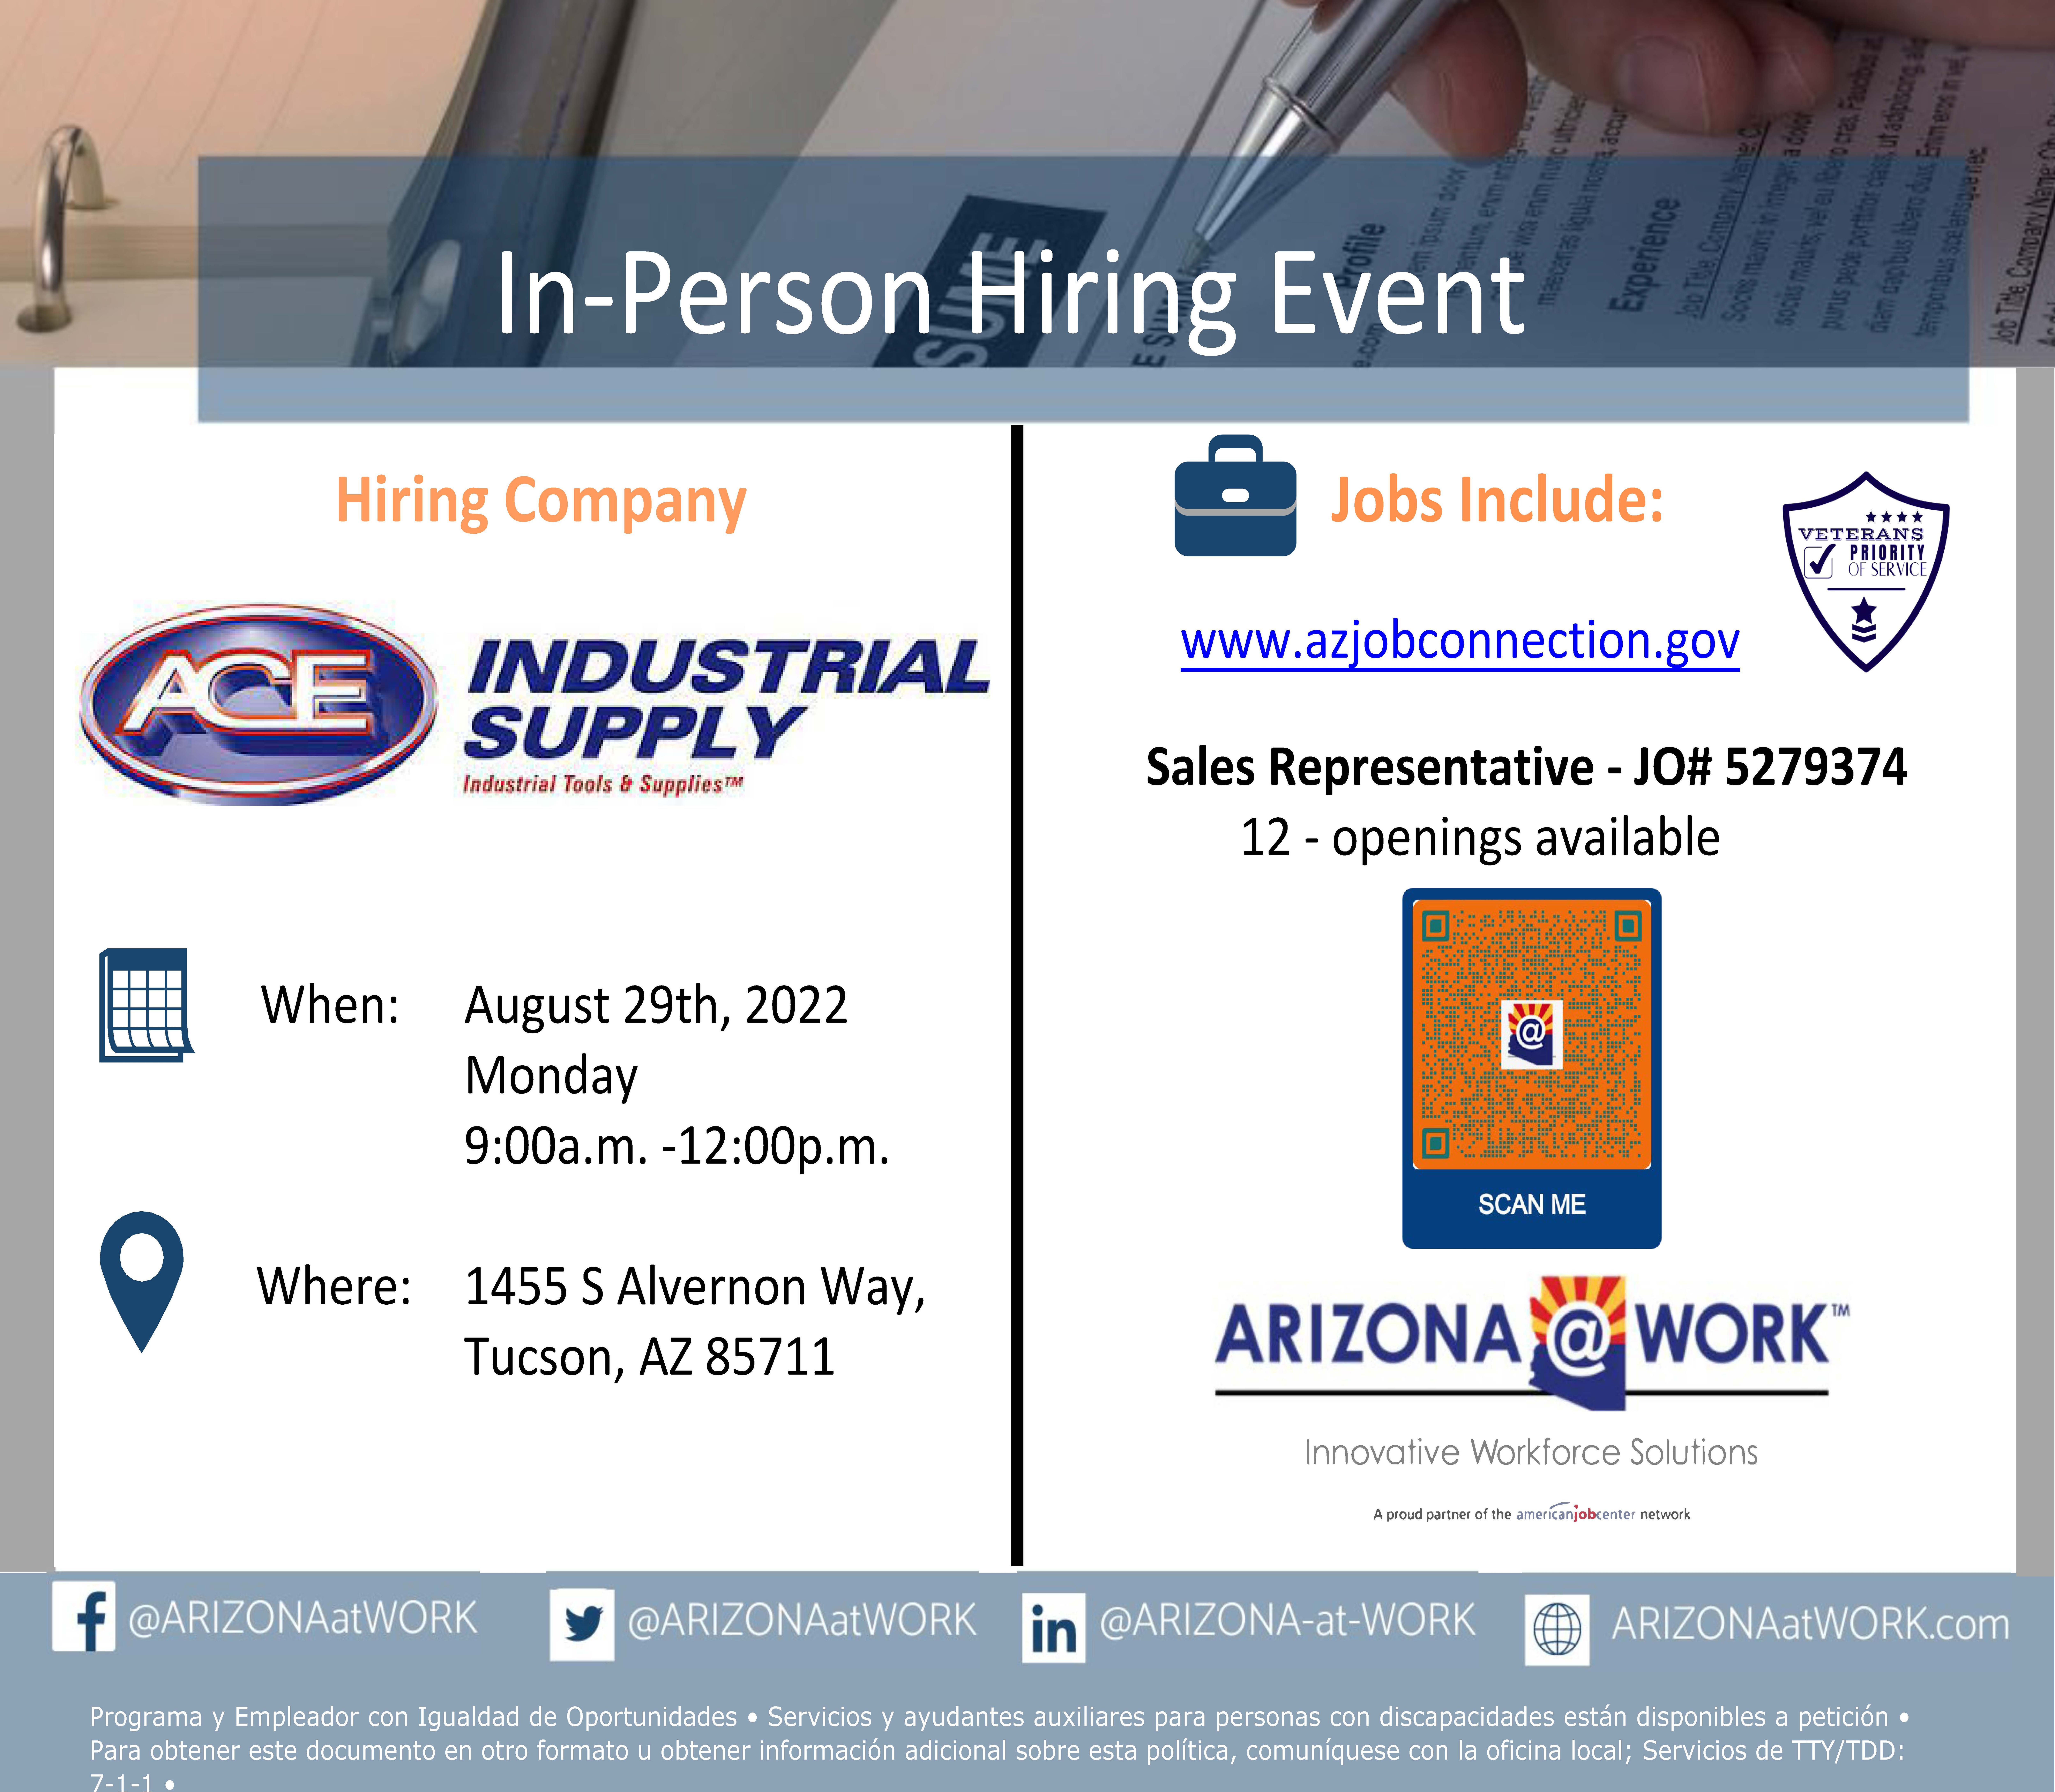 Ace Industrial Supply Hiring Event in Tucson on 8-29